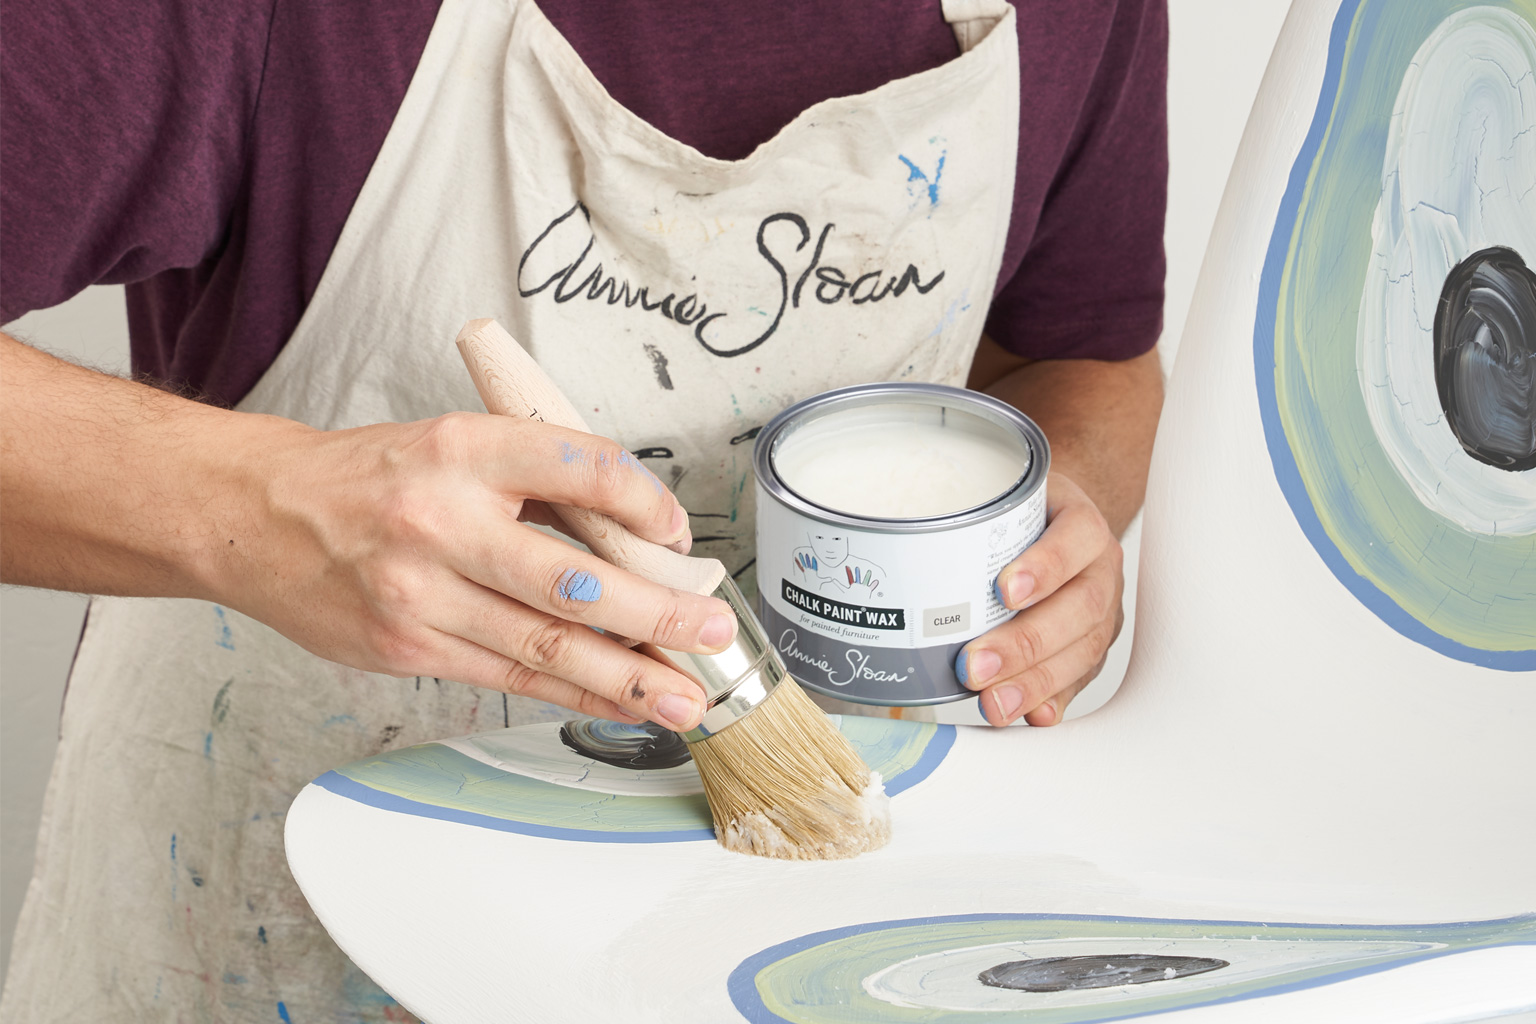 Can You Paint Over Chalk Paint? - A Quick How-To Guide